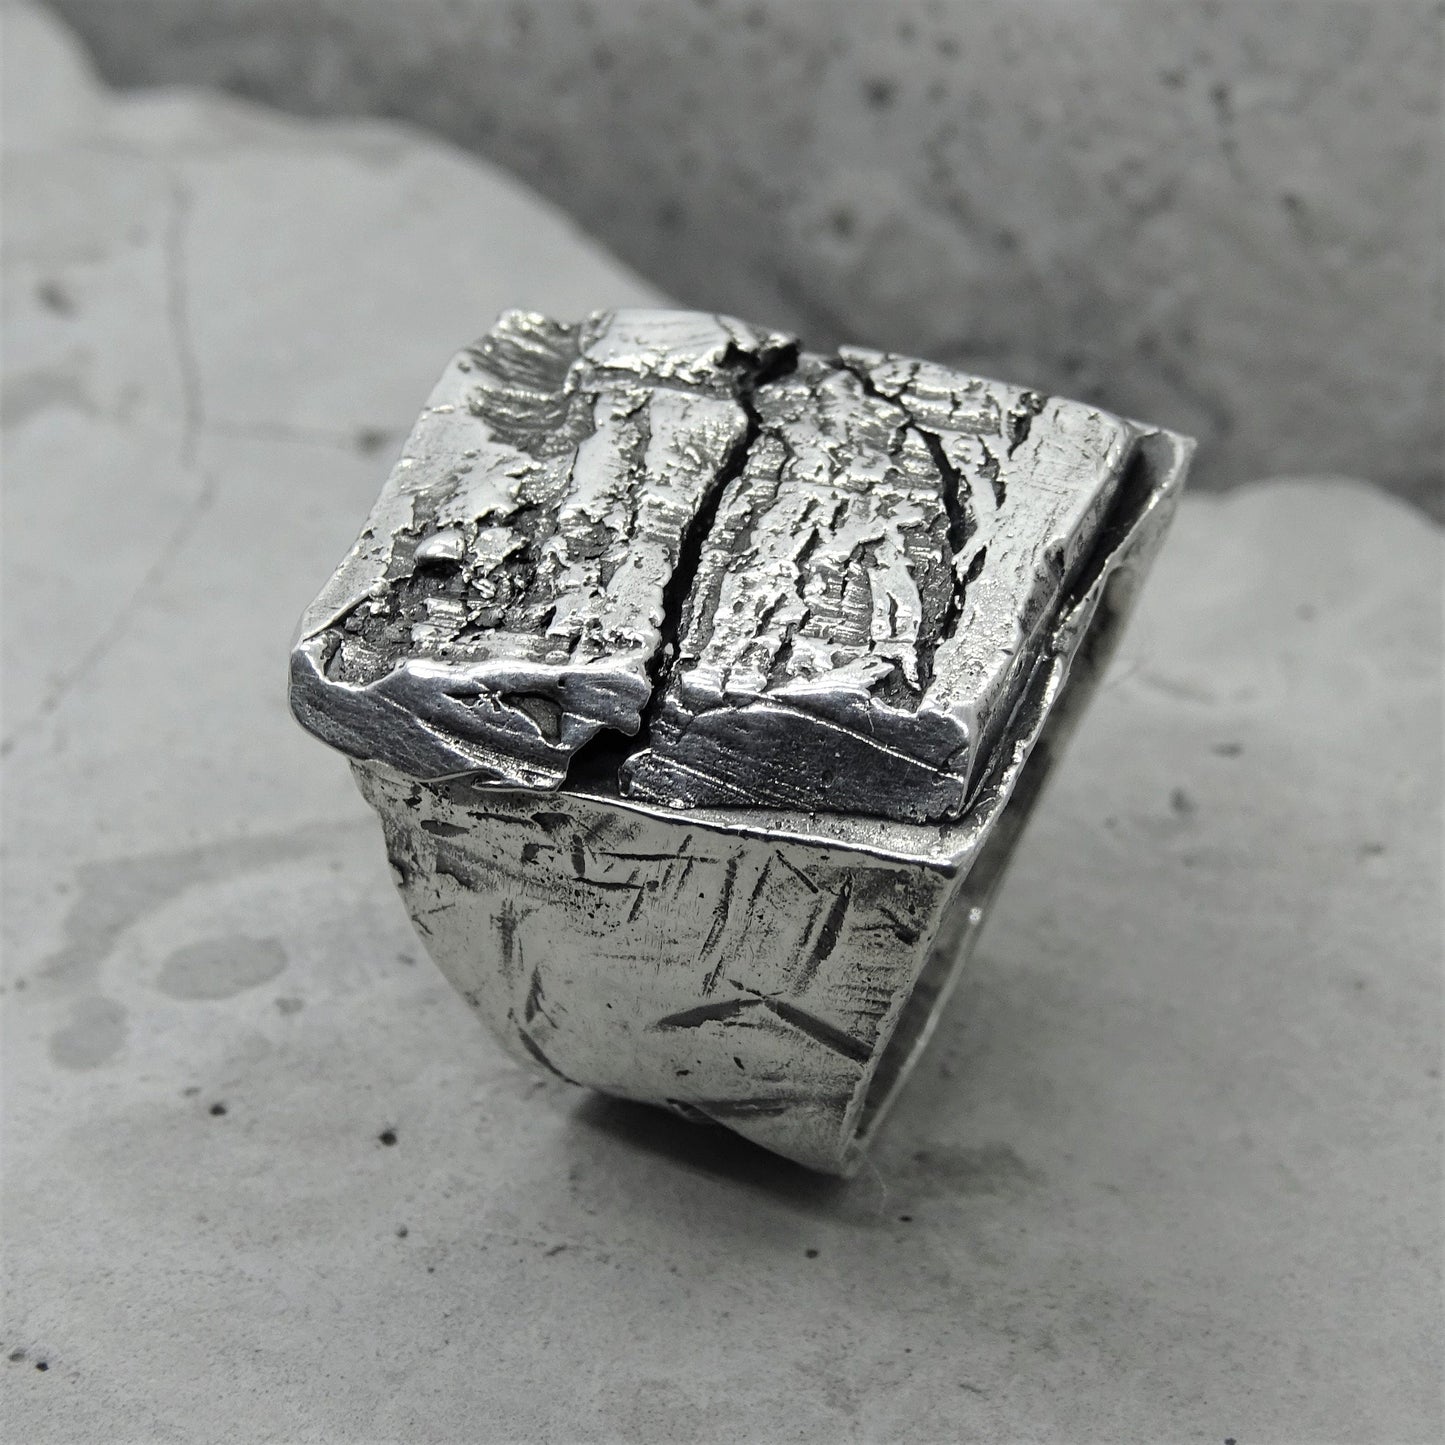 Plateau ring - unusual signet ring with cracks and chips Unusual rings Project50g 